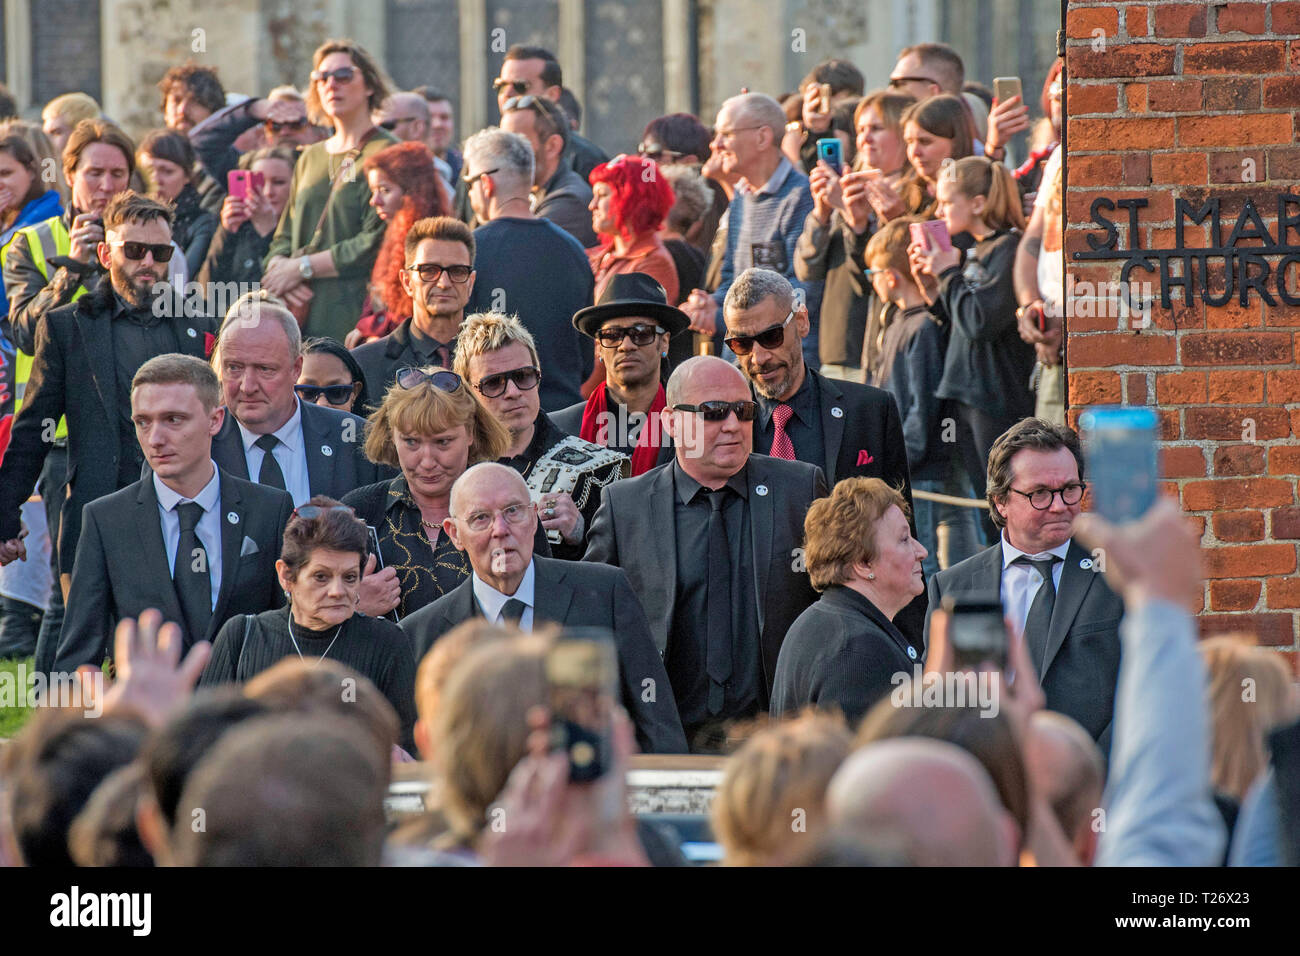 Essex, UK. 30th March 2019. The  funeral of Prodigy singer Keith Flint at St Marys Church in Bocking,  Essex today. Mourners leave the service and band members Liam Howlett, Maxim (Keith Palmer) and Leeroy Thornhill can be seen following Keith’s father Clive Flint out of the front gates of the church. Credit: Phil Rees/Alamy Live News Stock Photo